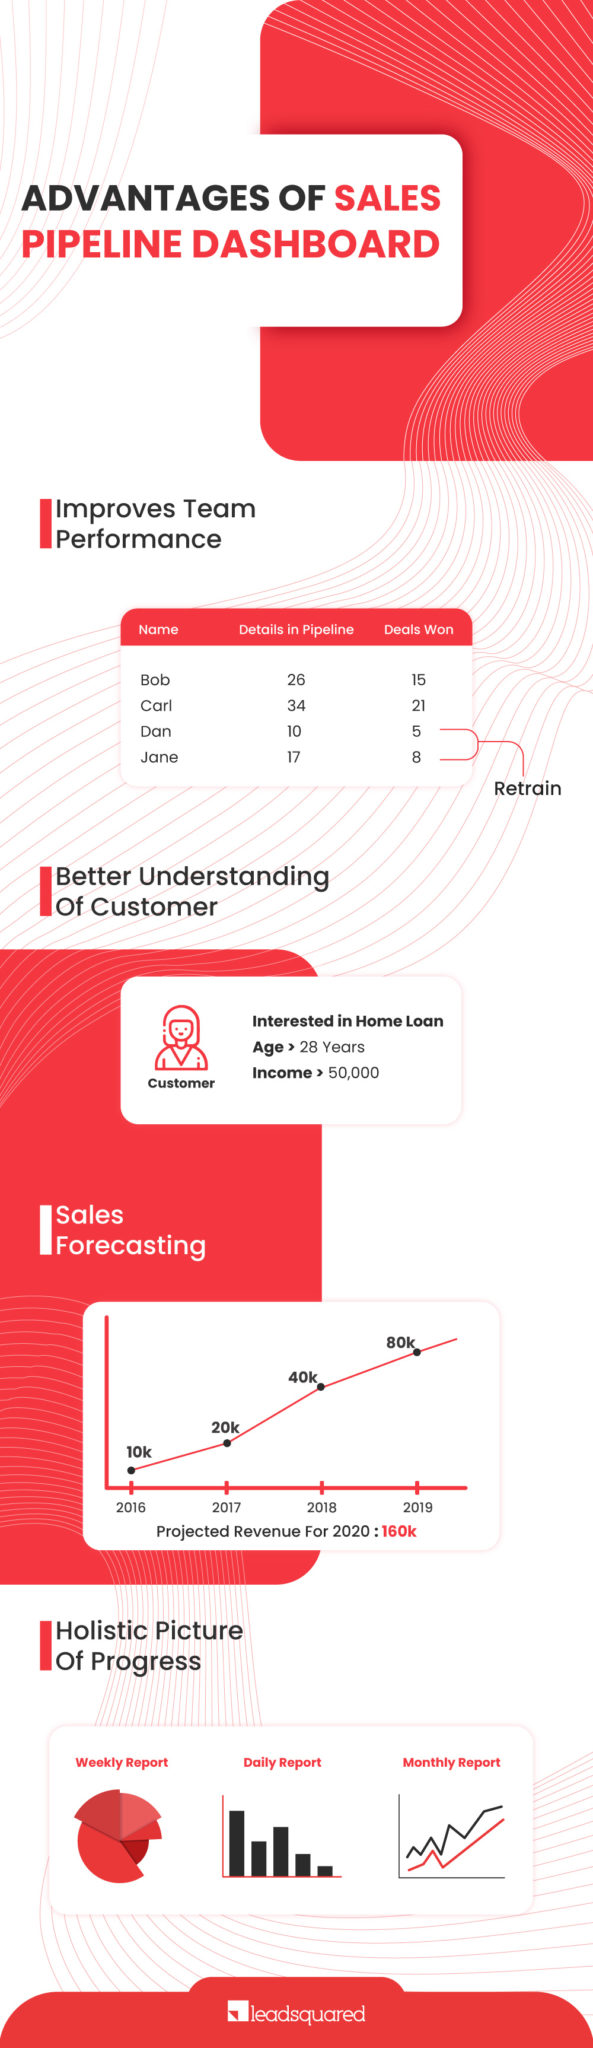 Sales pipeline dashboard - infographic